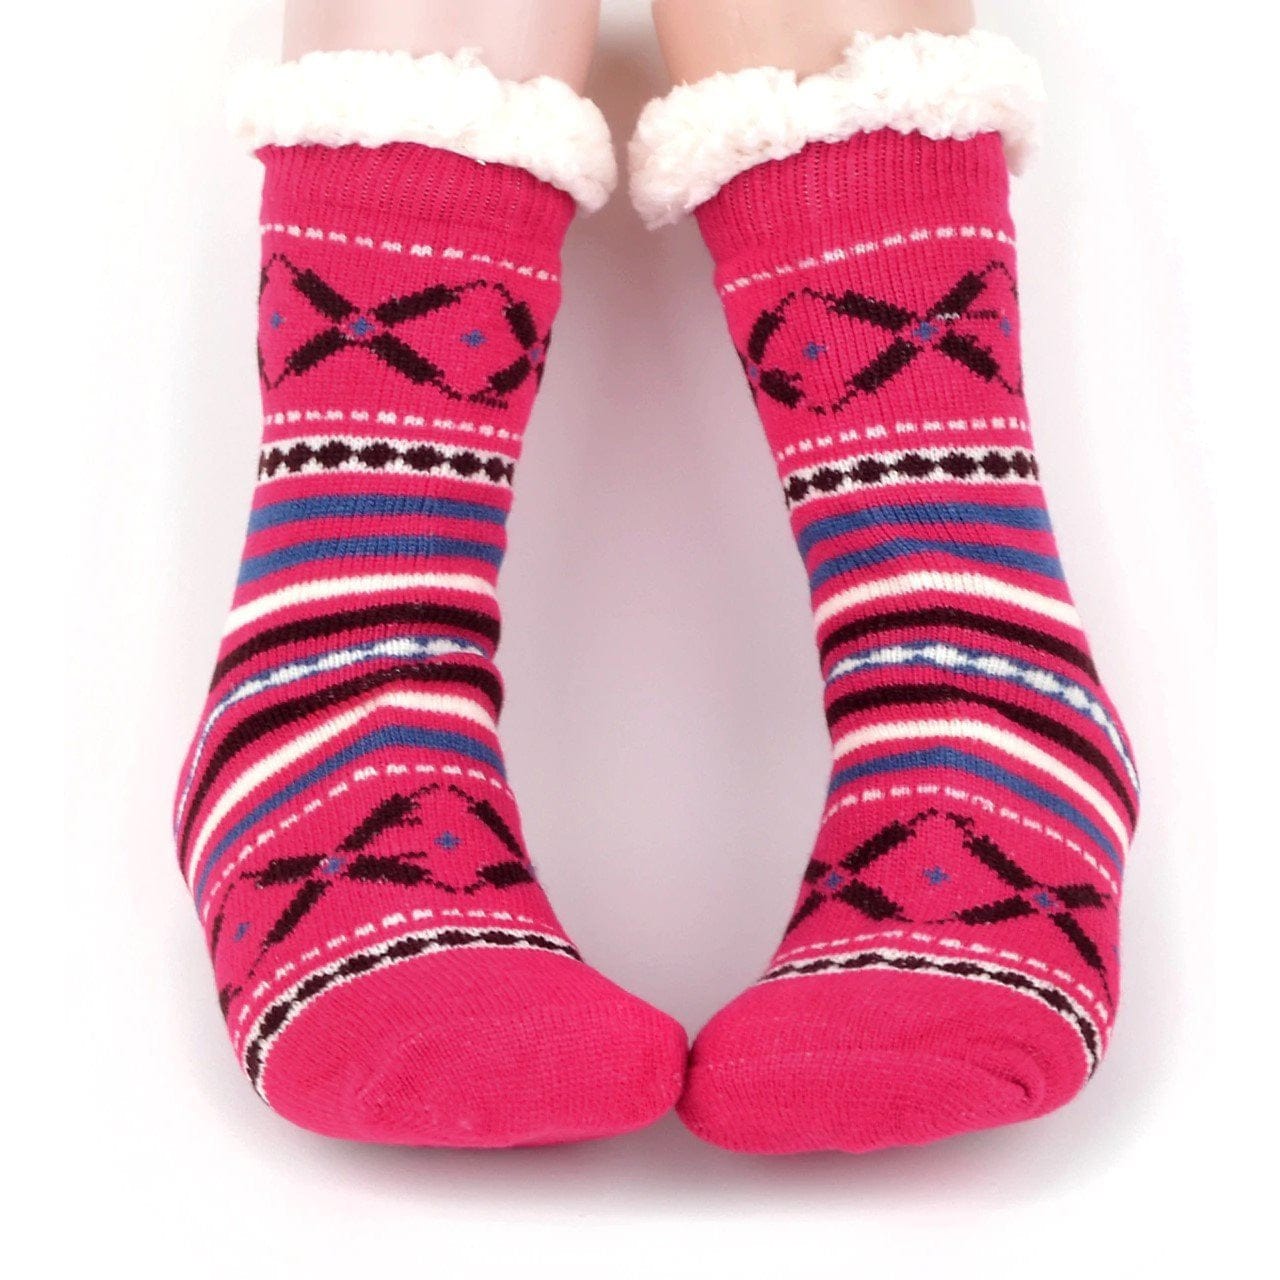 Ladies & Girls Slipper Socks, Thick & Fuzzy Sherpa Slipper Socks, 5 Varieties SZ 4-10shoe - The Pink Pigs, A Compassionate Boutique